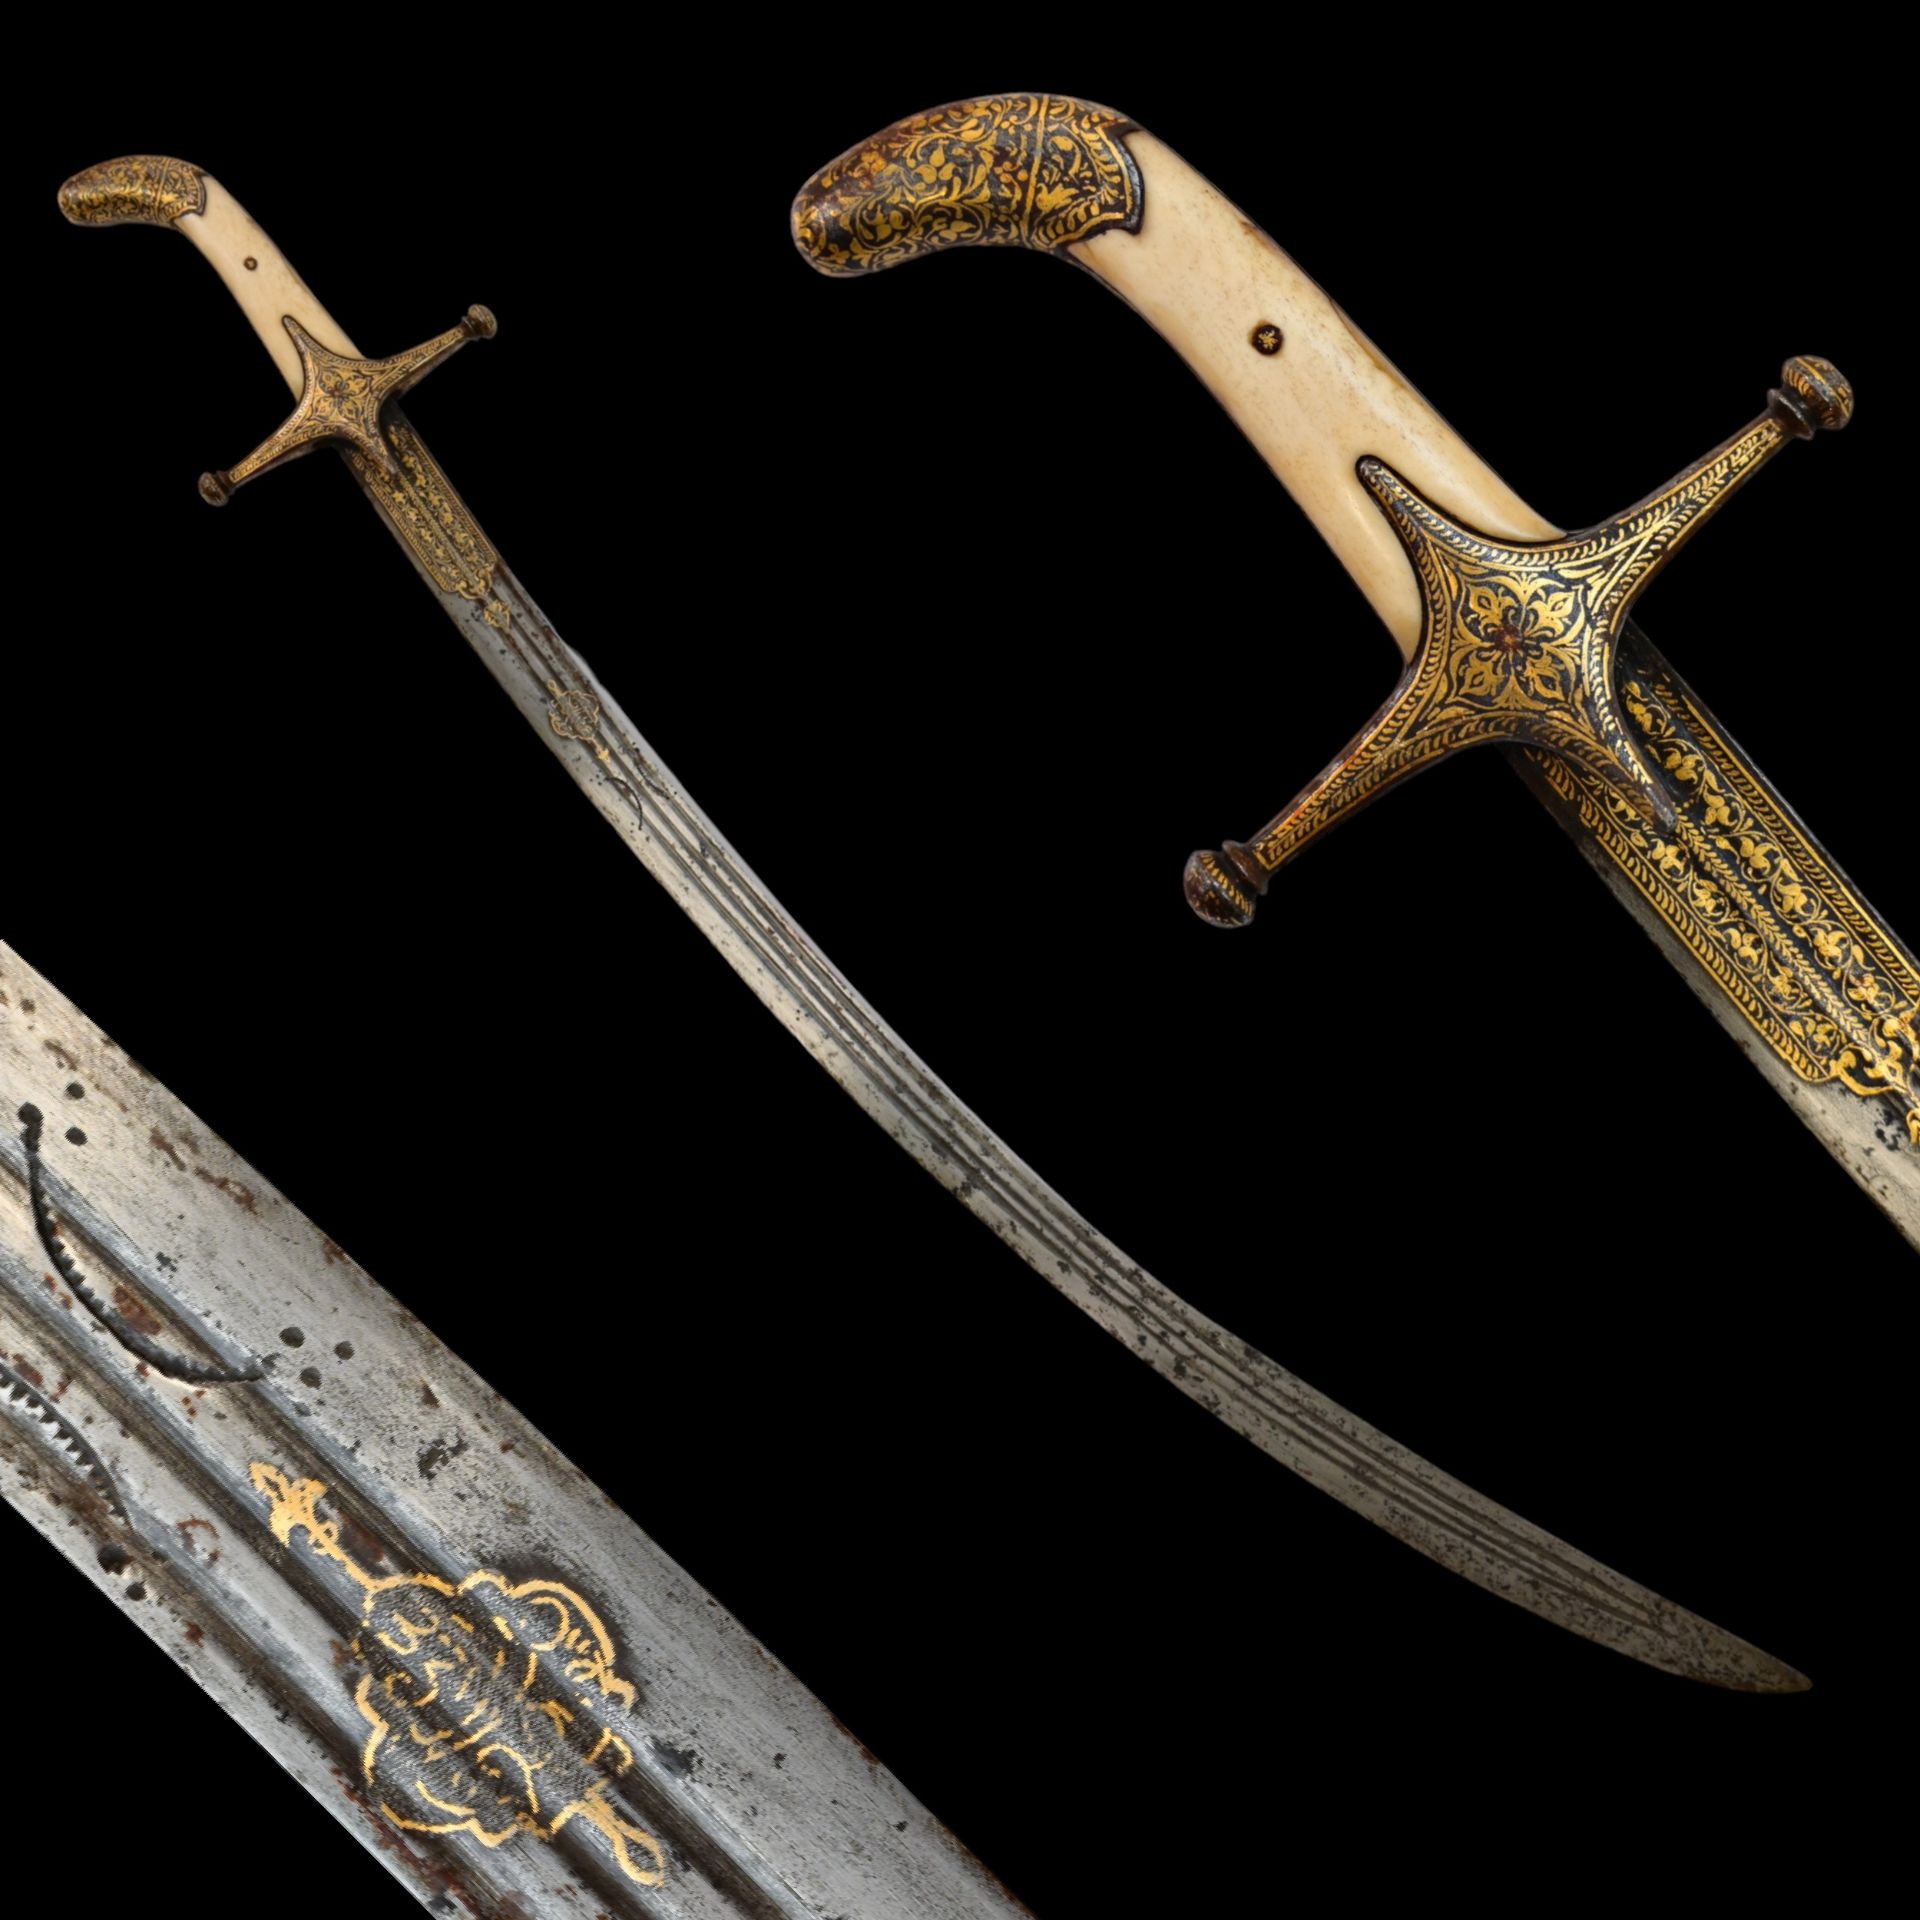 Richly decorated with gold Georgian saber from the 19th century with an 18th century blade.